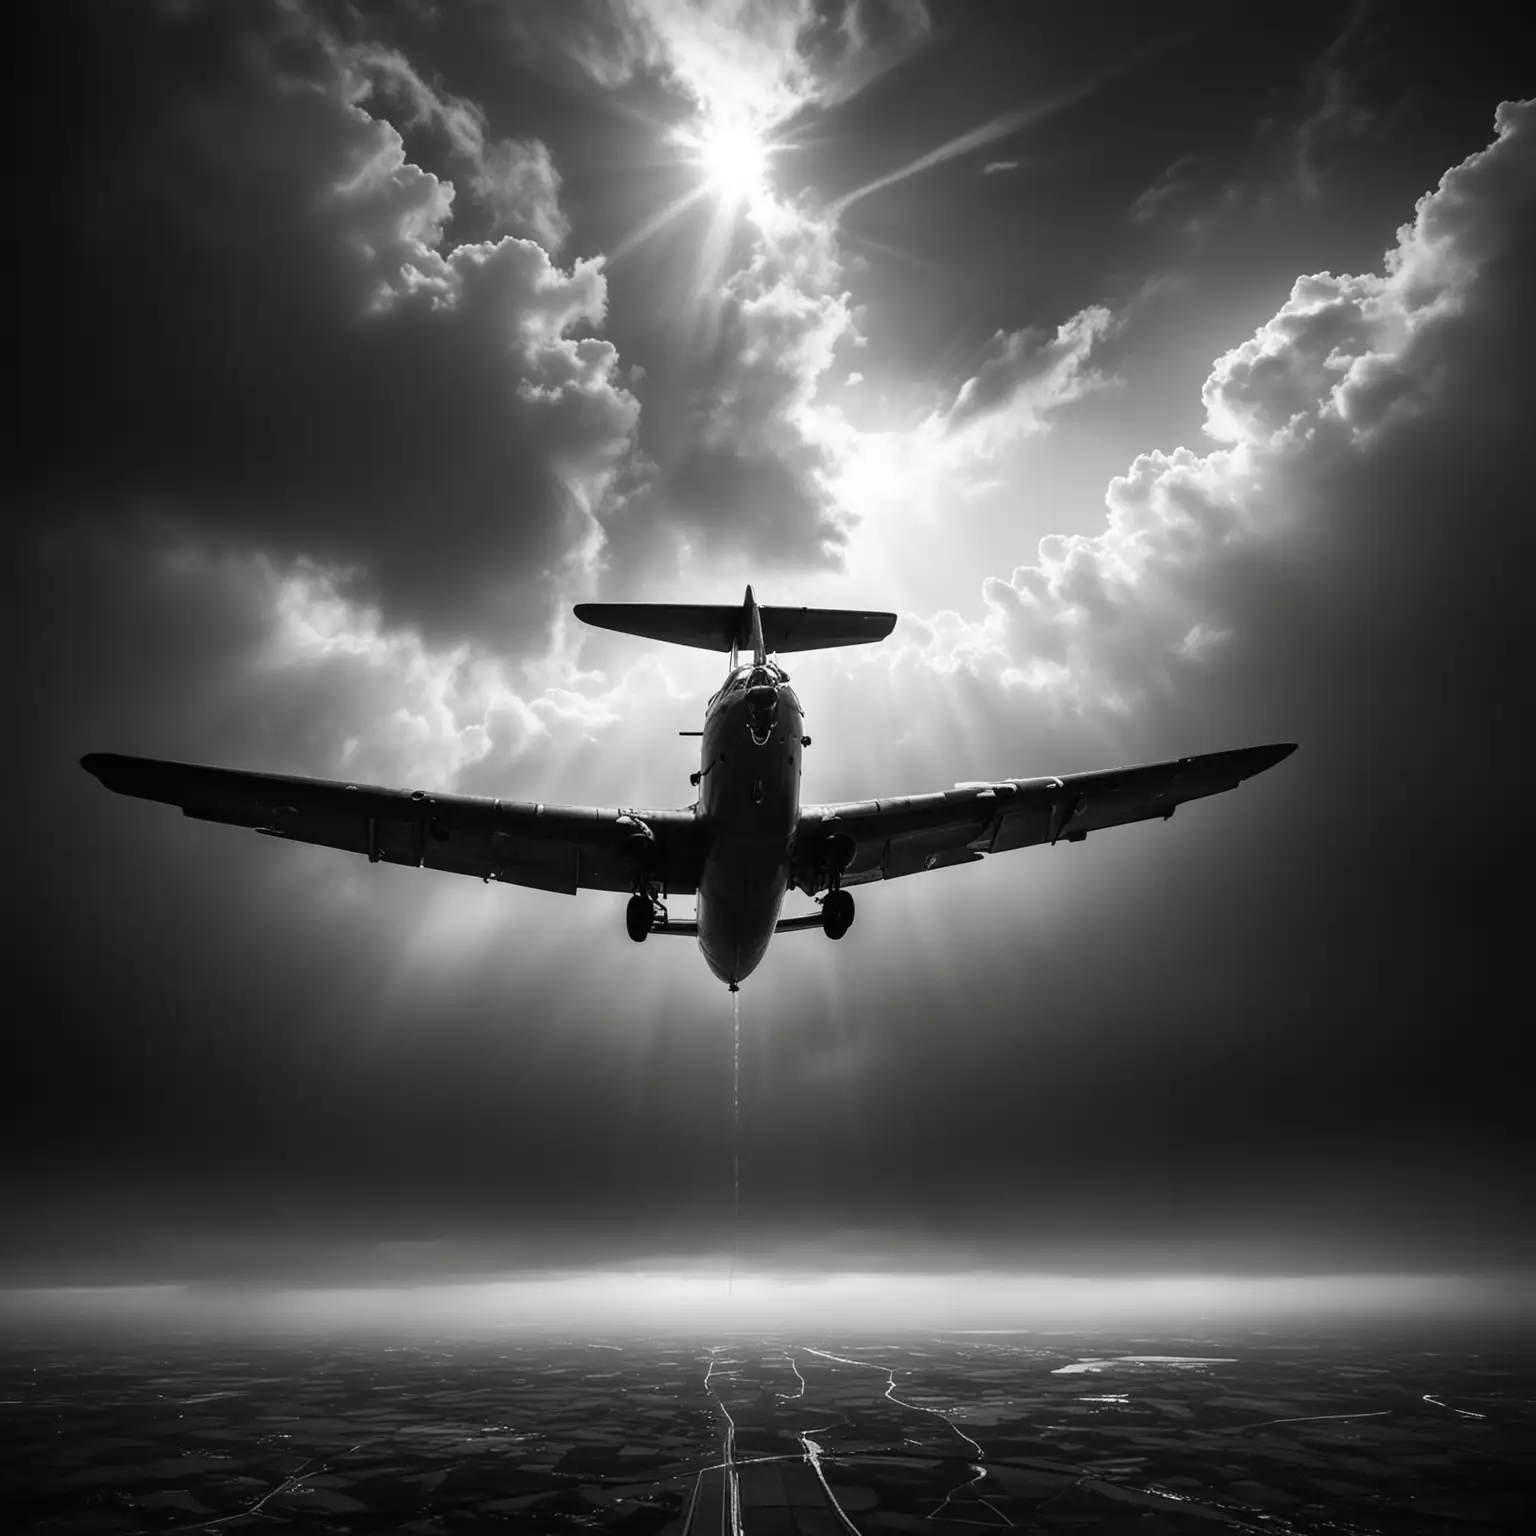 Ethereal Adventure Captivating Black and White Flight